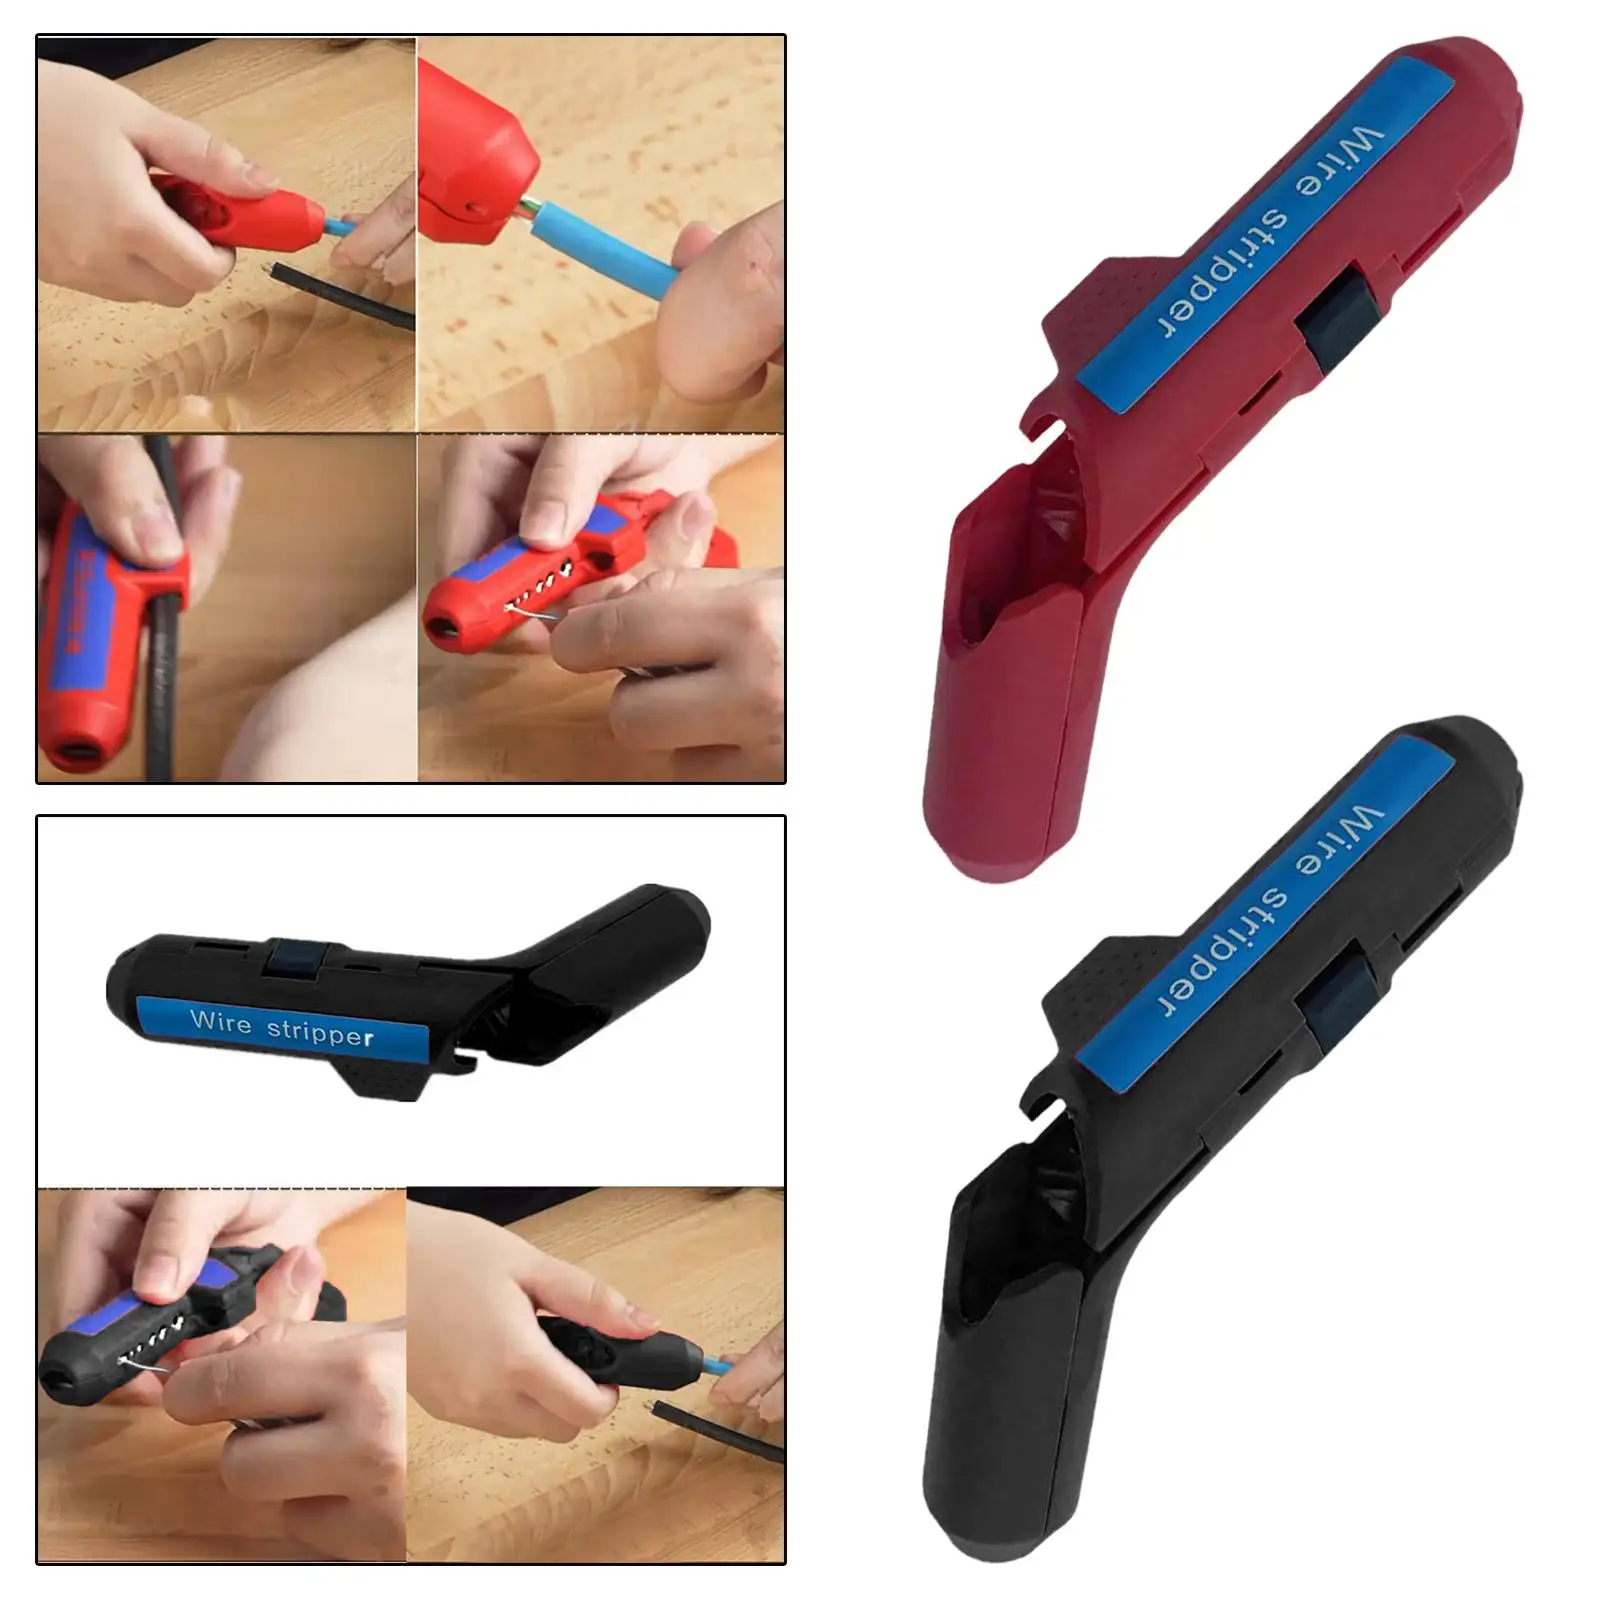 Wire Stripper Professional Multi Function Wire Crimper Wire Pliers Tool Cable Stripper for Cable Wire Stripping Cutting Winding